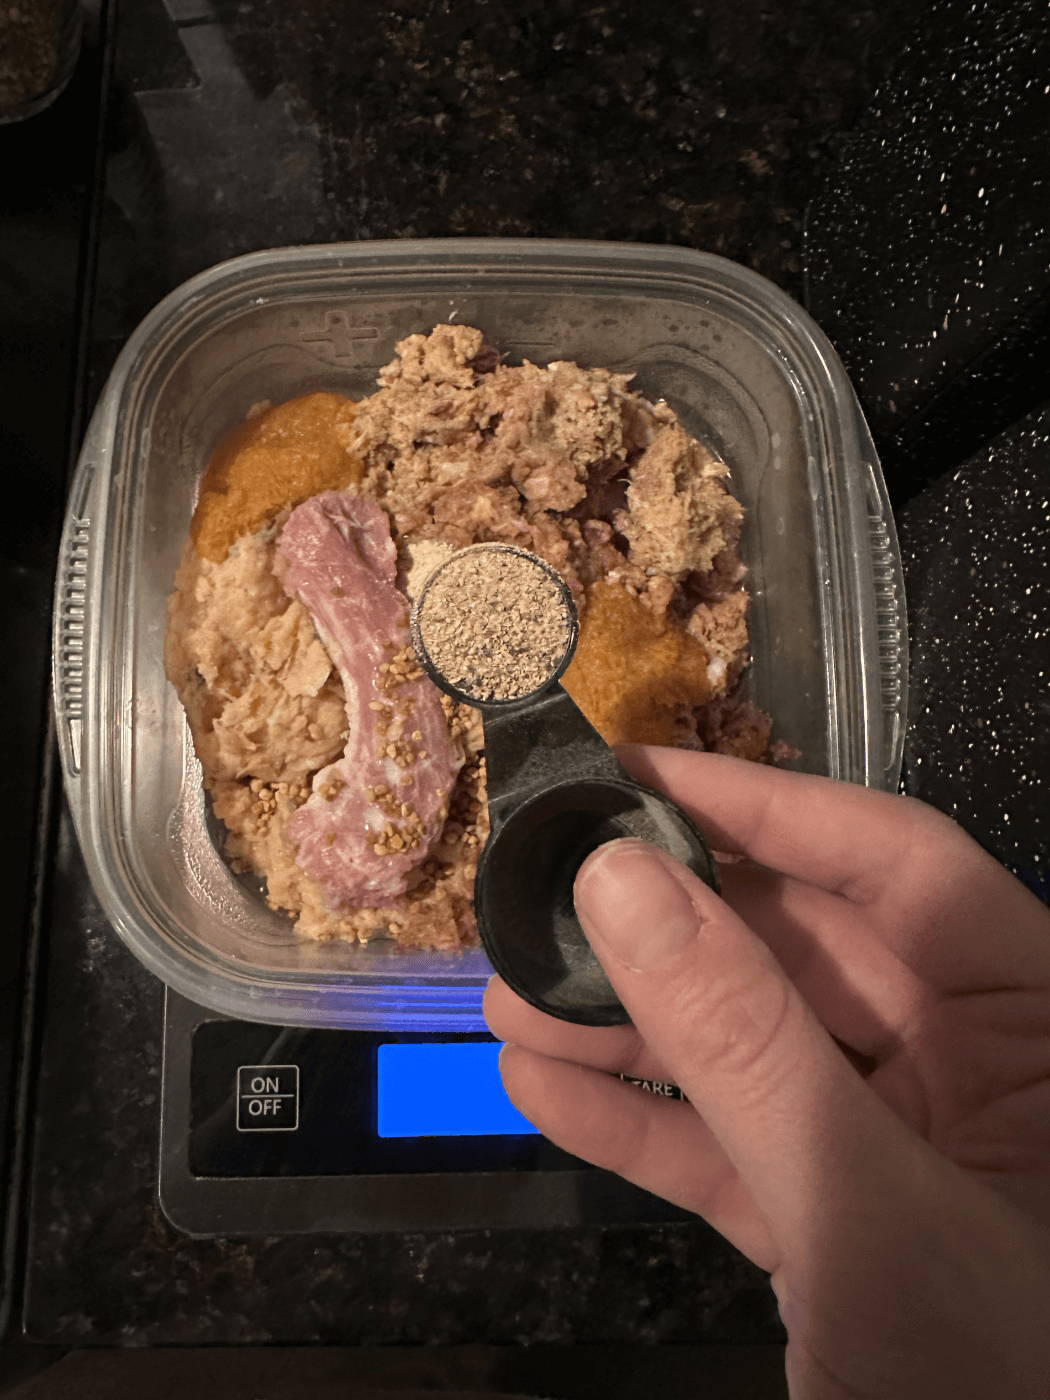 Hand of person adding supplement powder over raw meat in Tupperware.